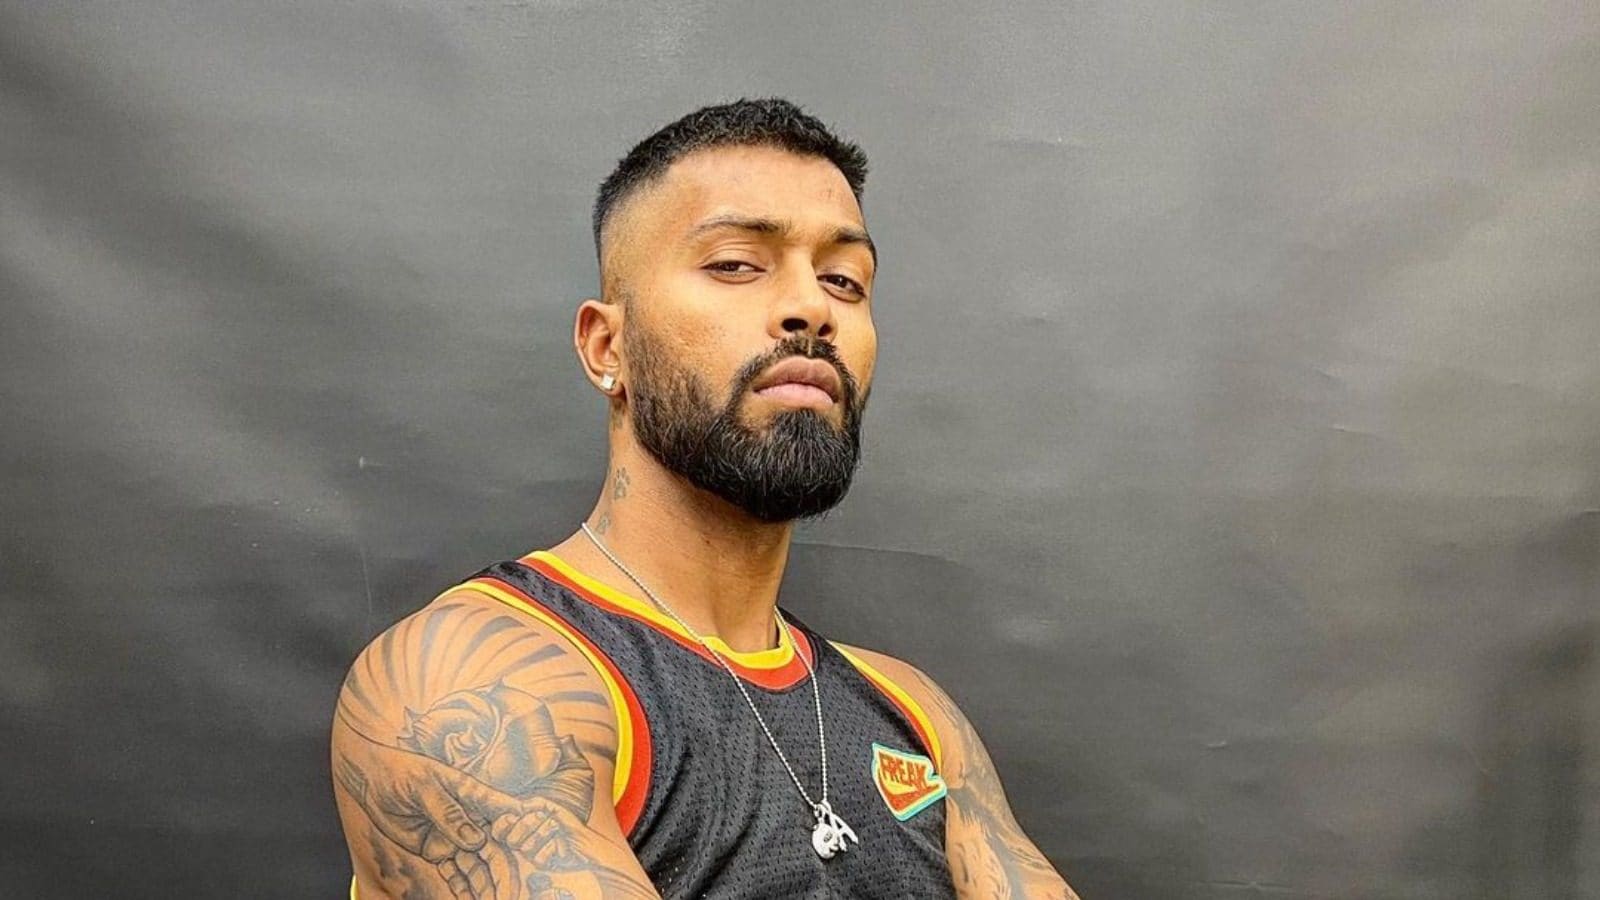 Aliens Tattoo - Hardik Pandya is undoubtedly one of the most daring and  dynamic player on the field, and the Lion Tattoo on his arm is just an  extension of his personality.